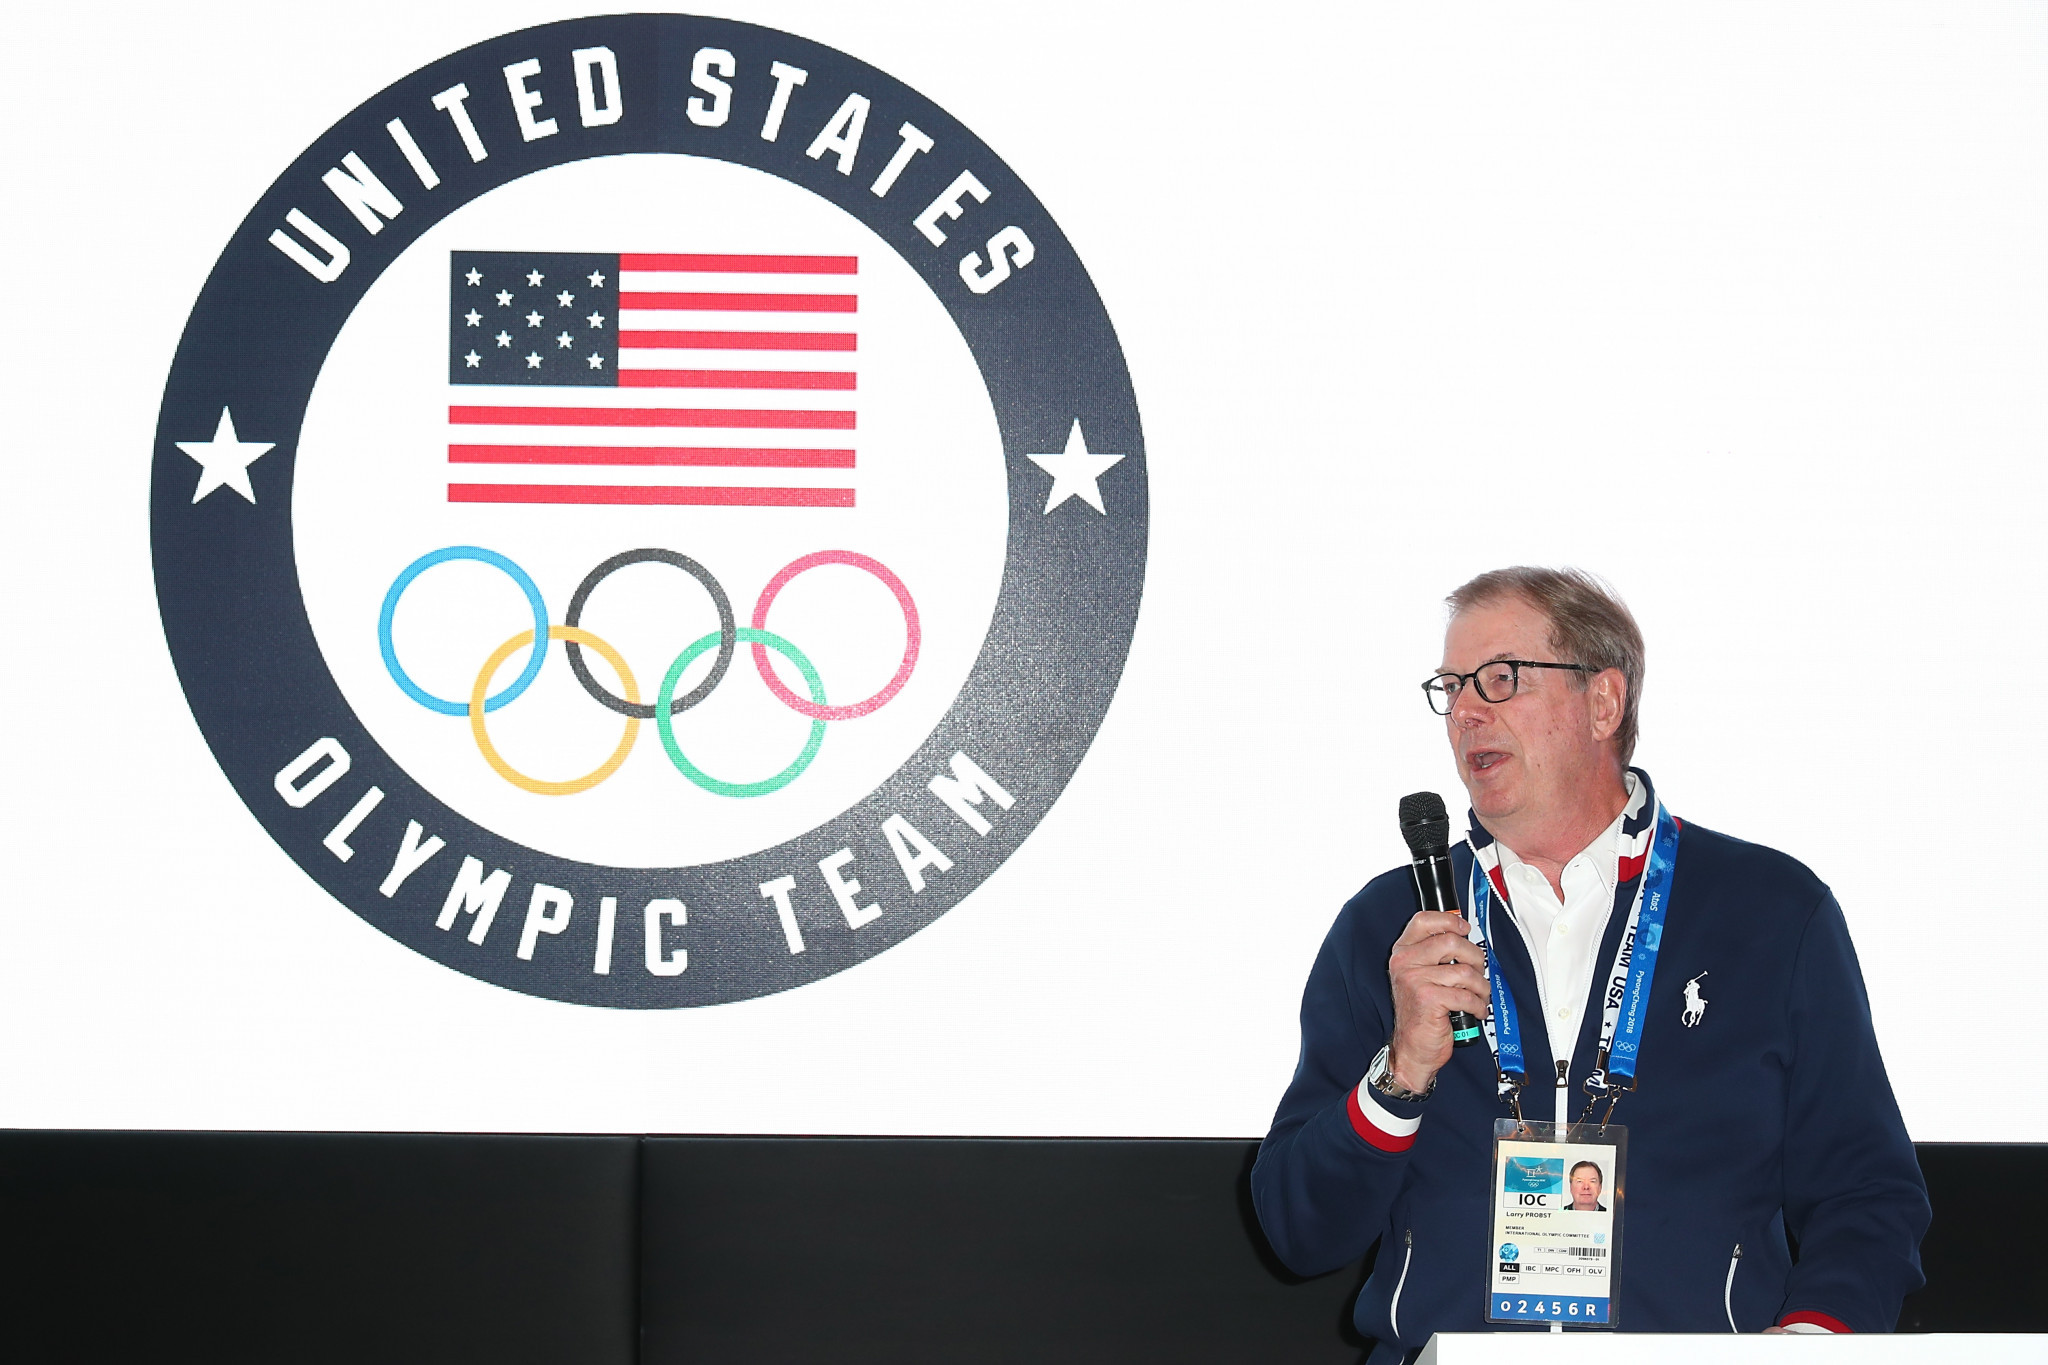 USOC close to concluding search for new chief executive